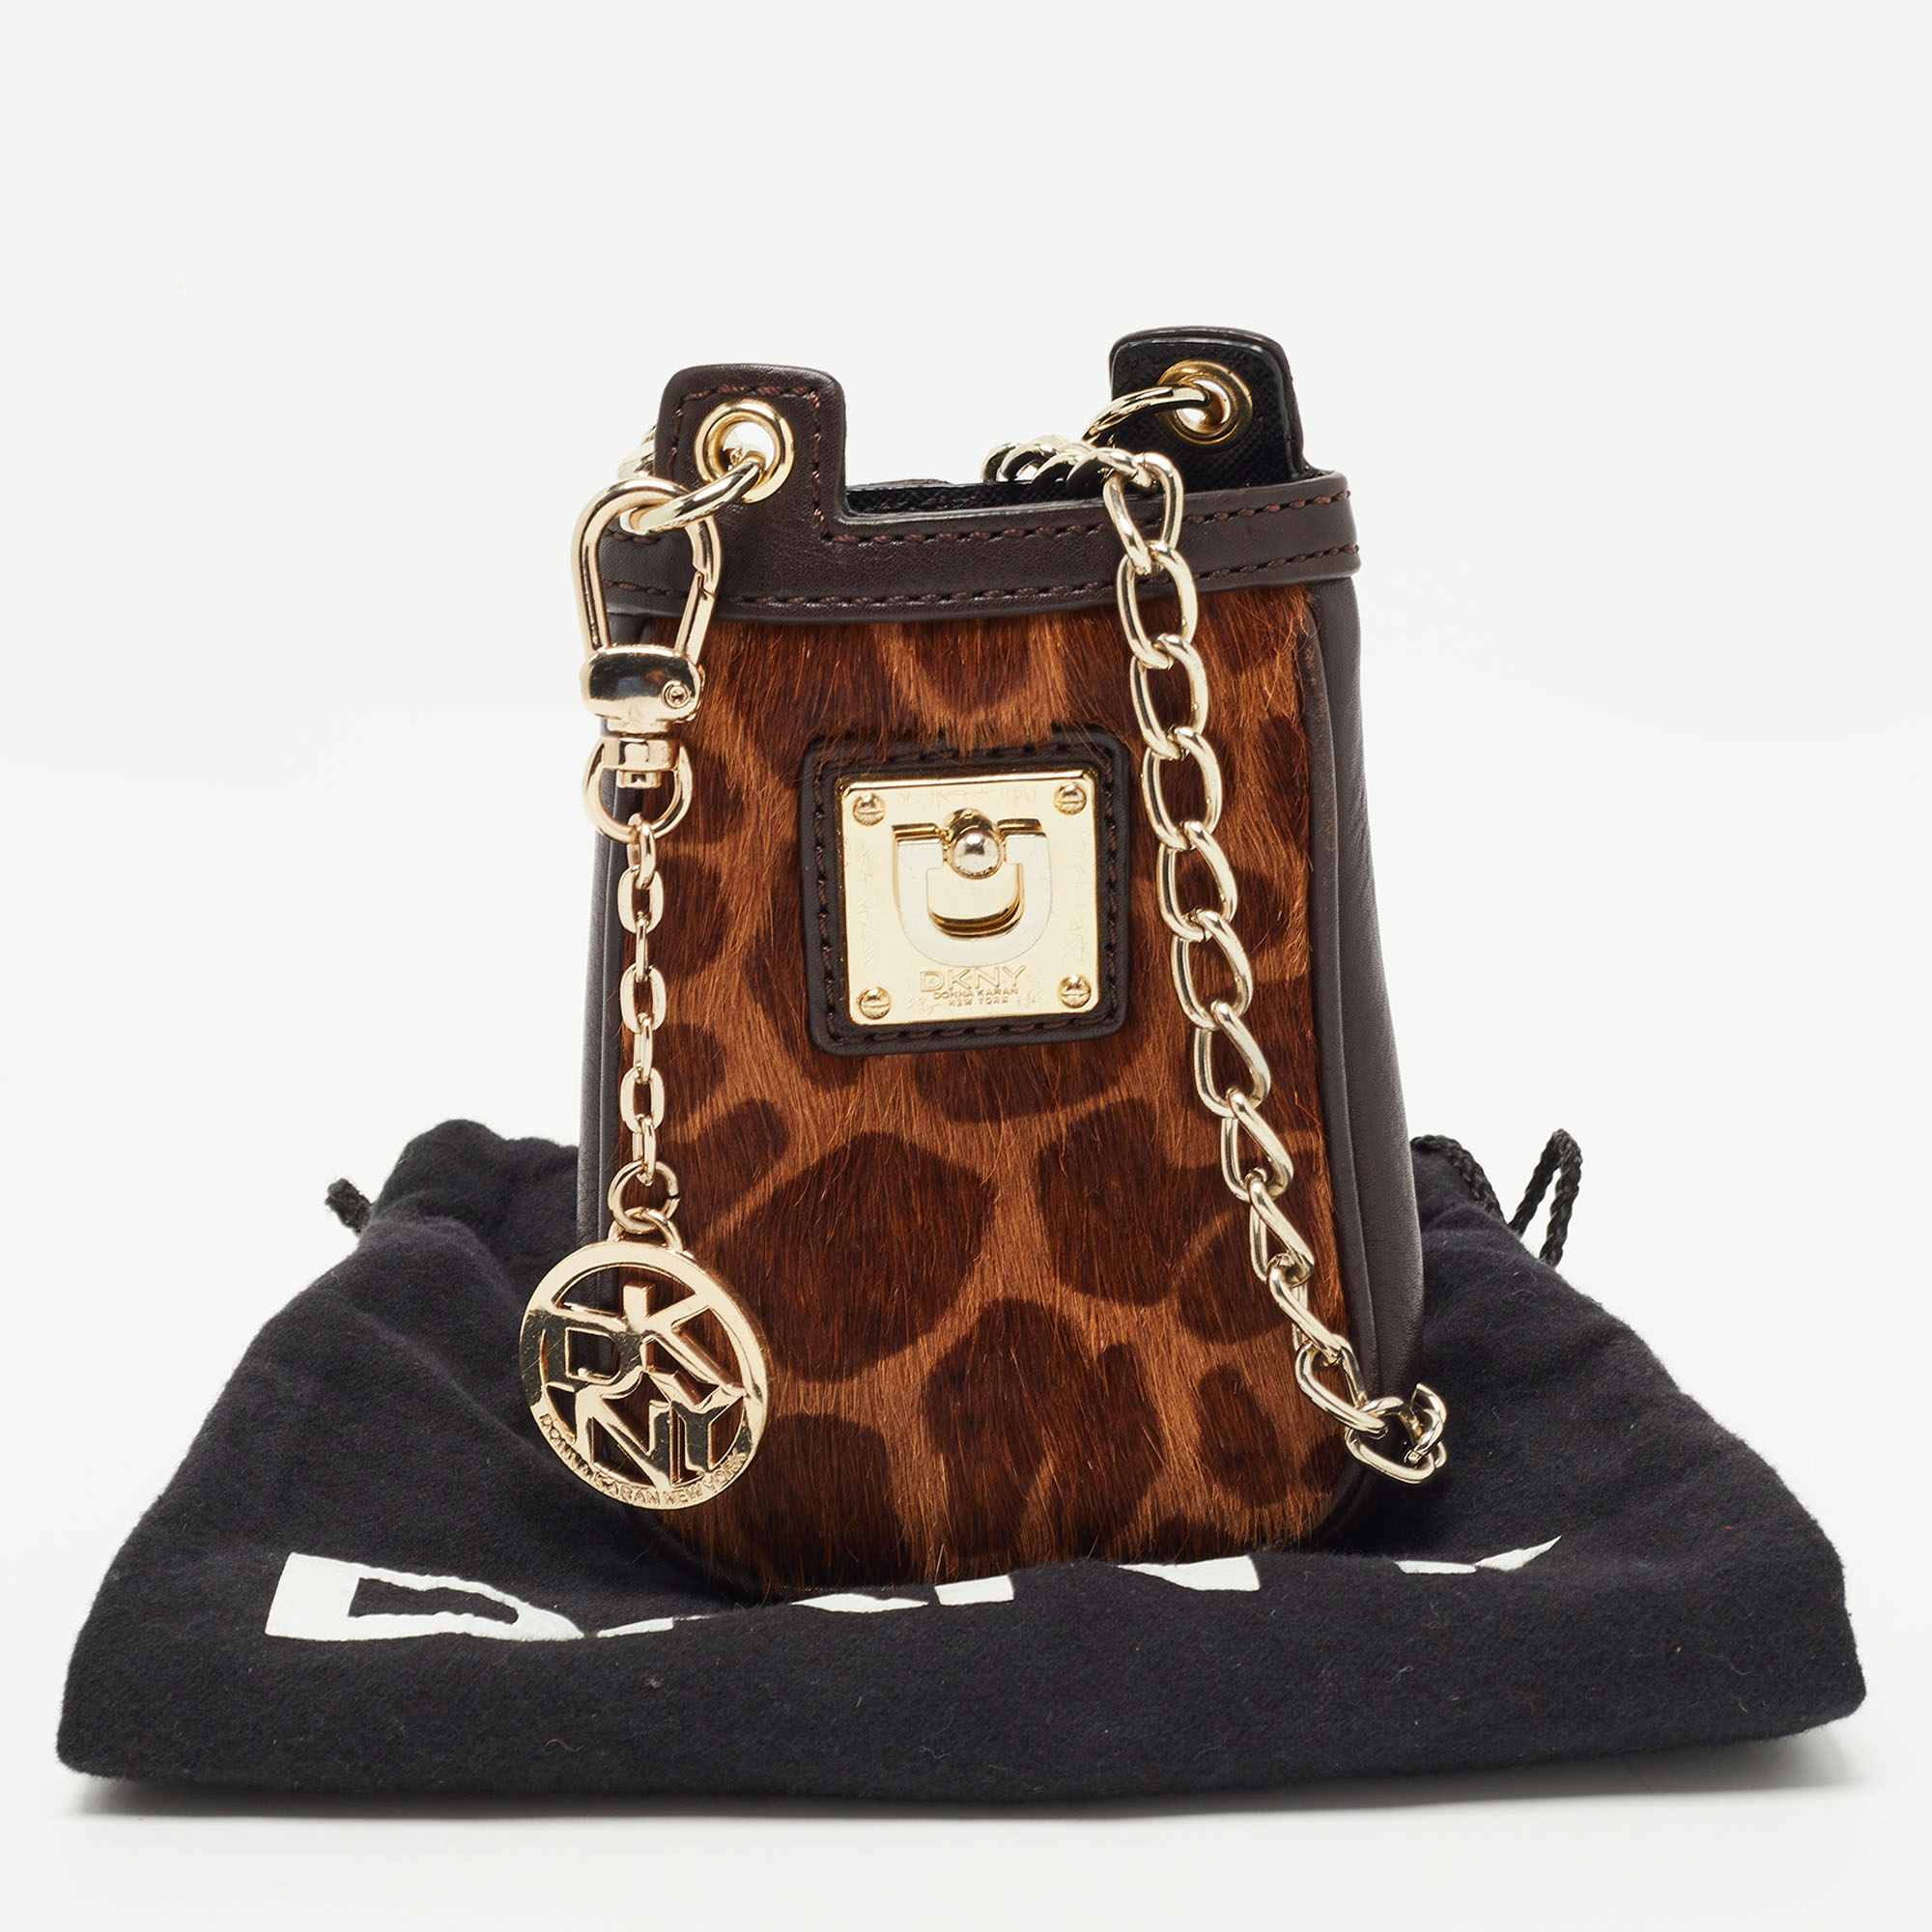 DKNY Brown Leopard Print Calfhair And Leather Chain Phone Case